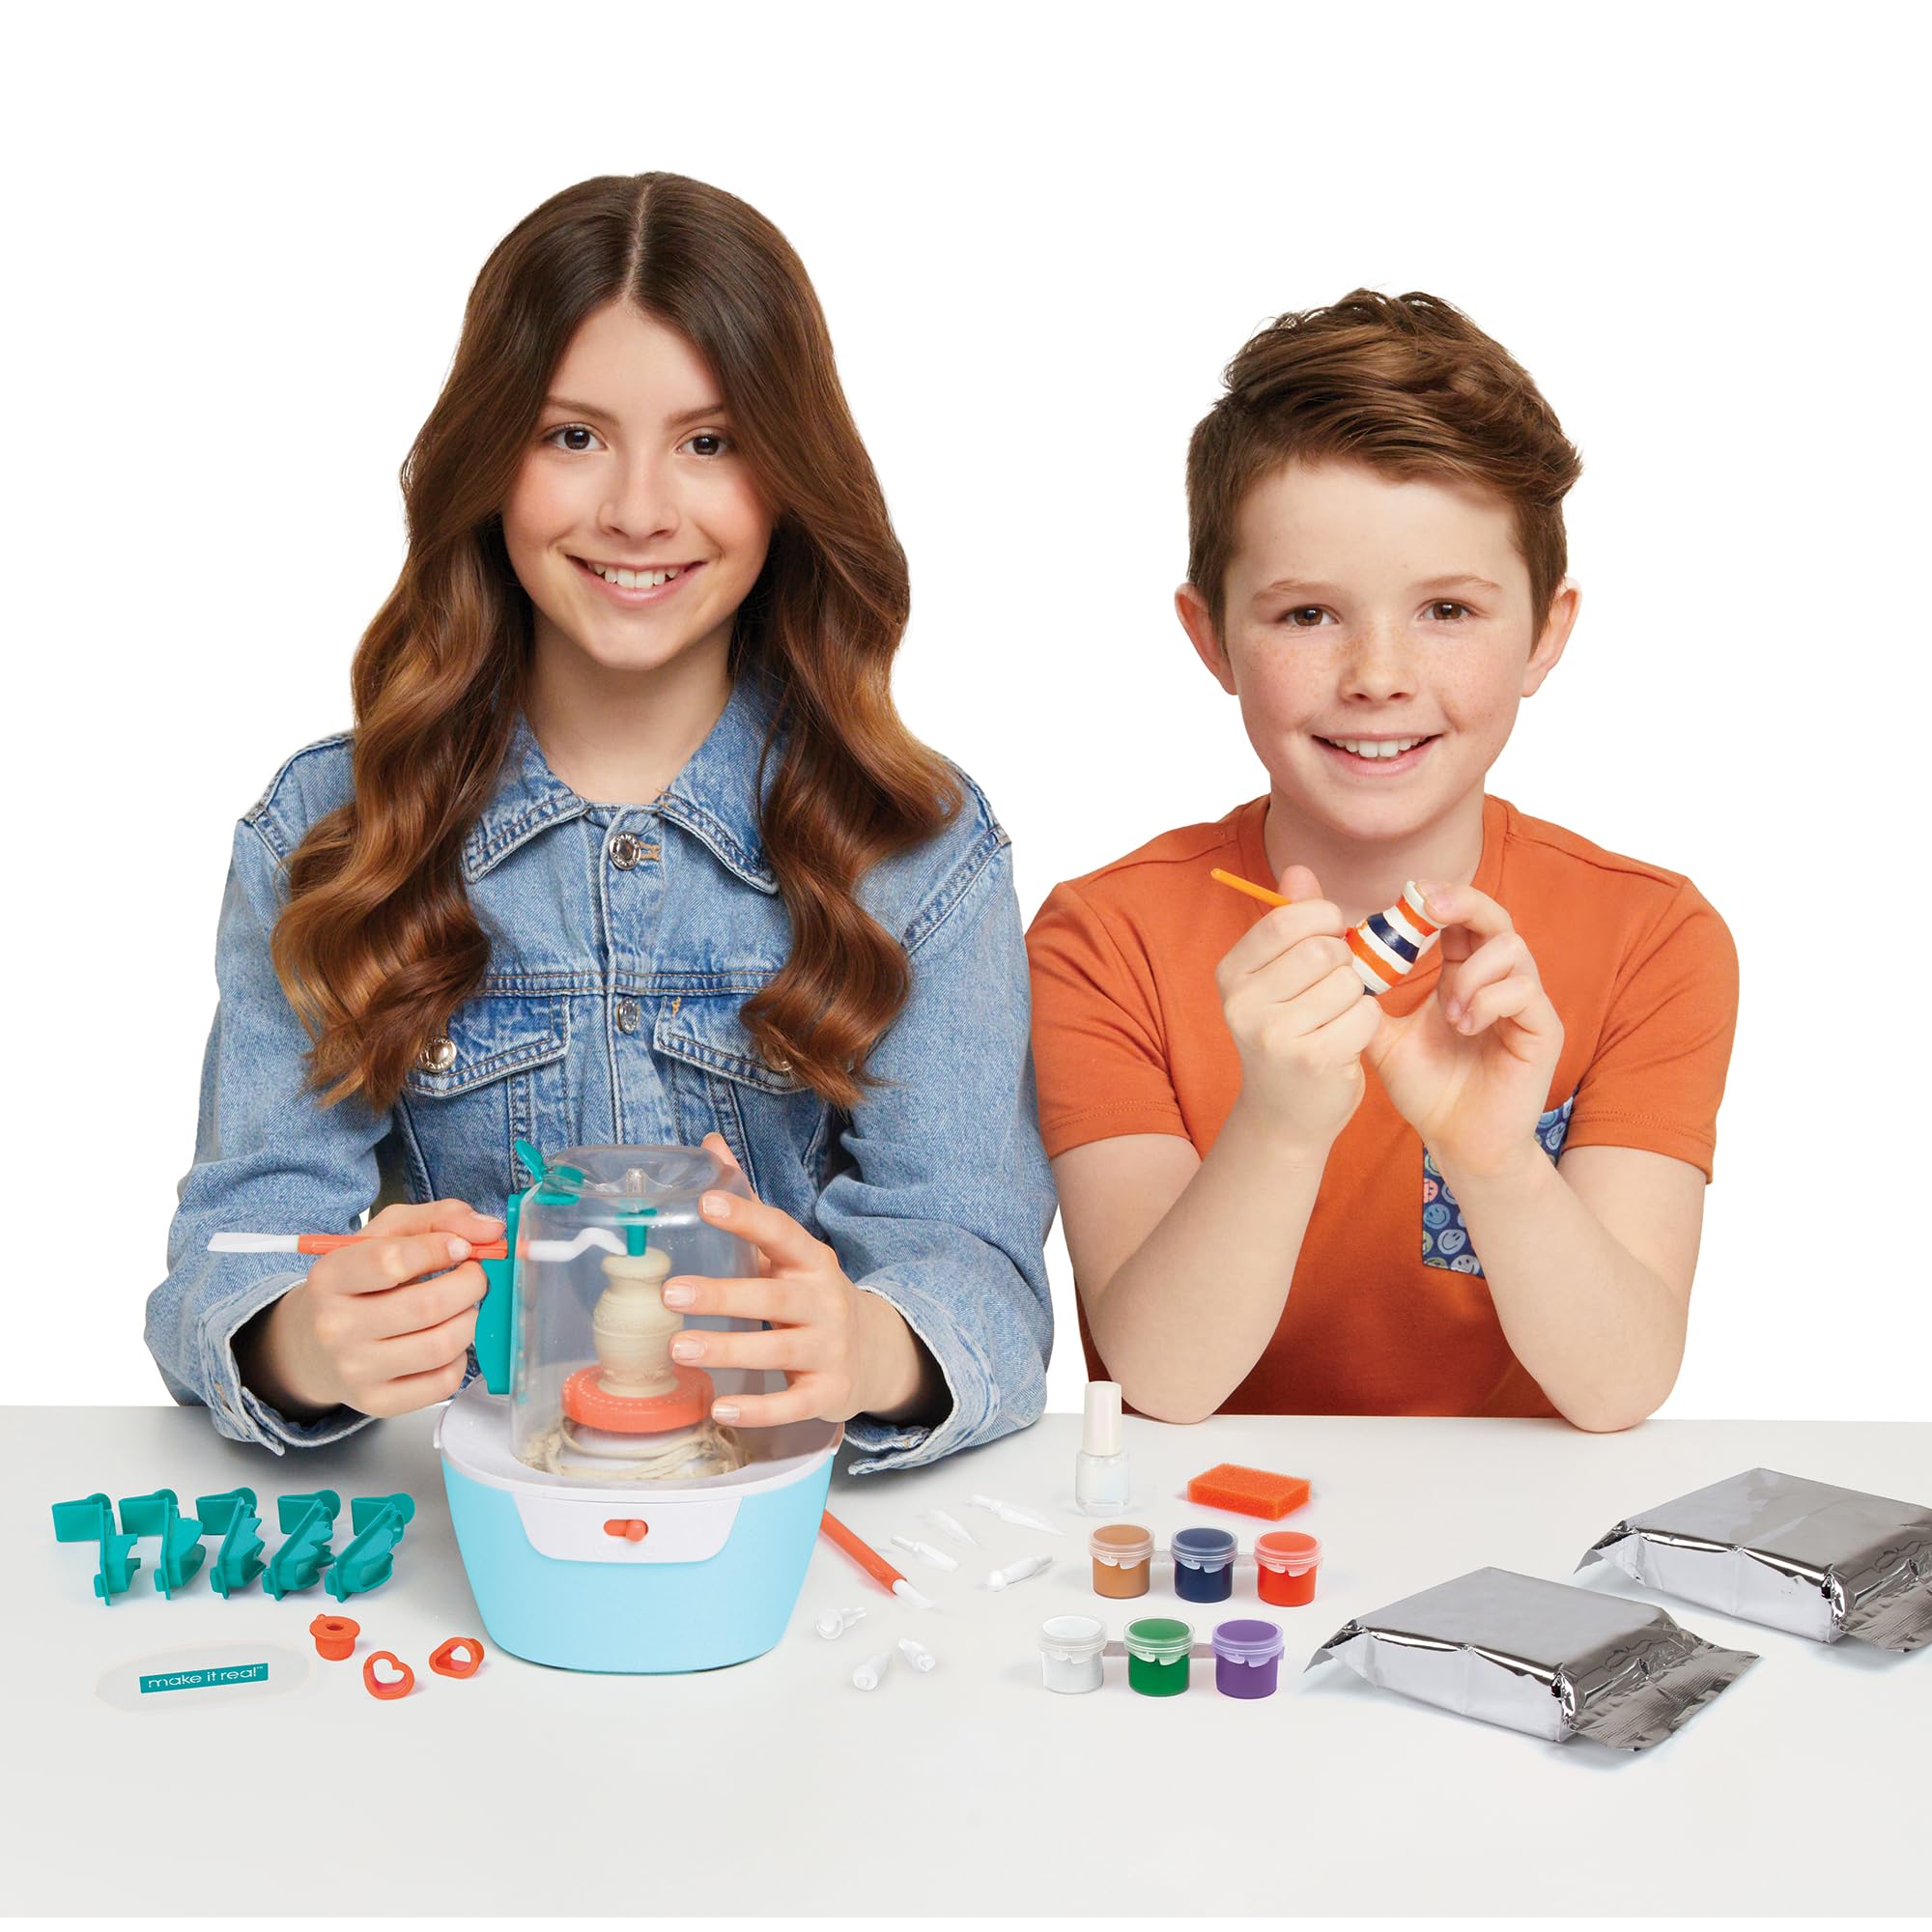 Make It Real: Mini Pottery Studio Deluxe Set - DIY All-in-1 Sculpting Craft Kit, All Skill Levels, Miniature Clay Projects, Kids Girls & Tweens Age 8+